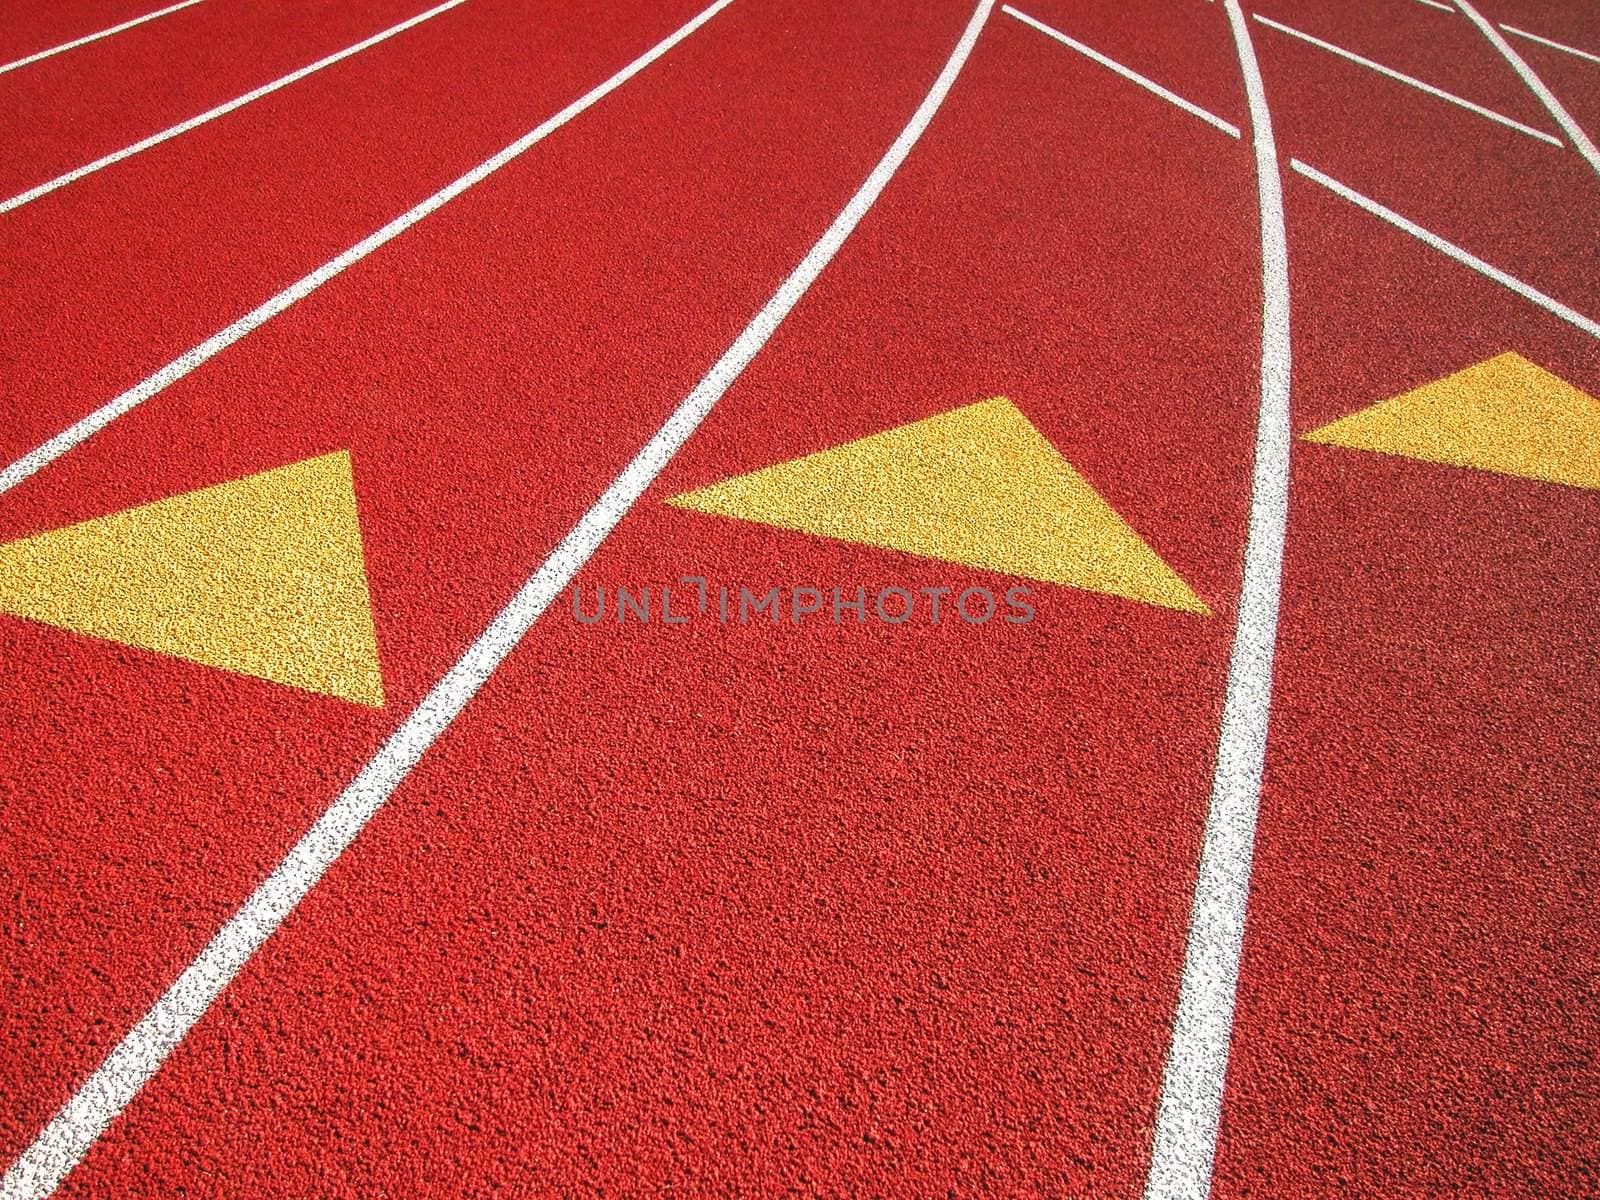 The Red Surface and White Lane Lines of a running track